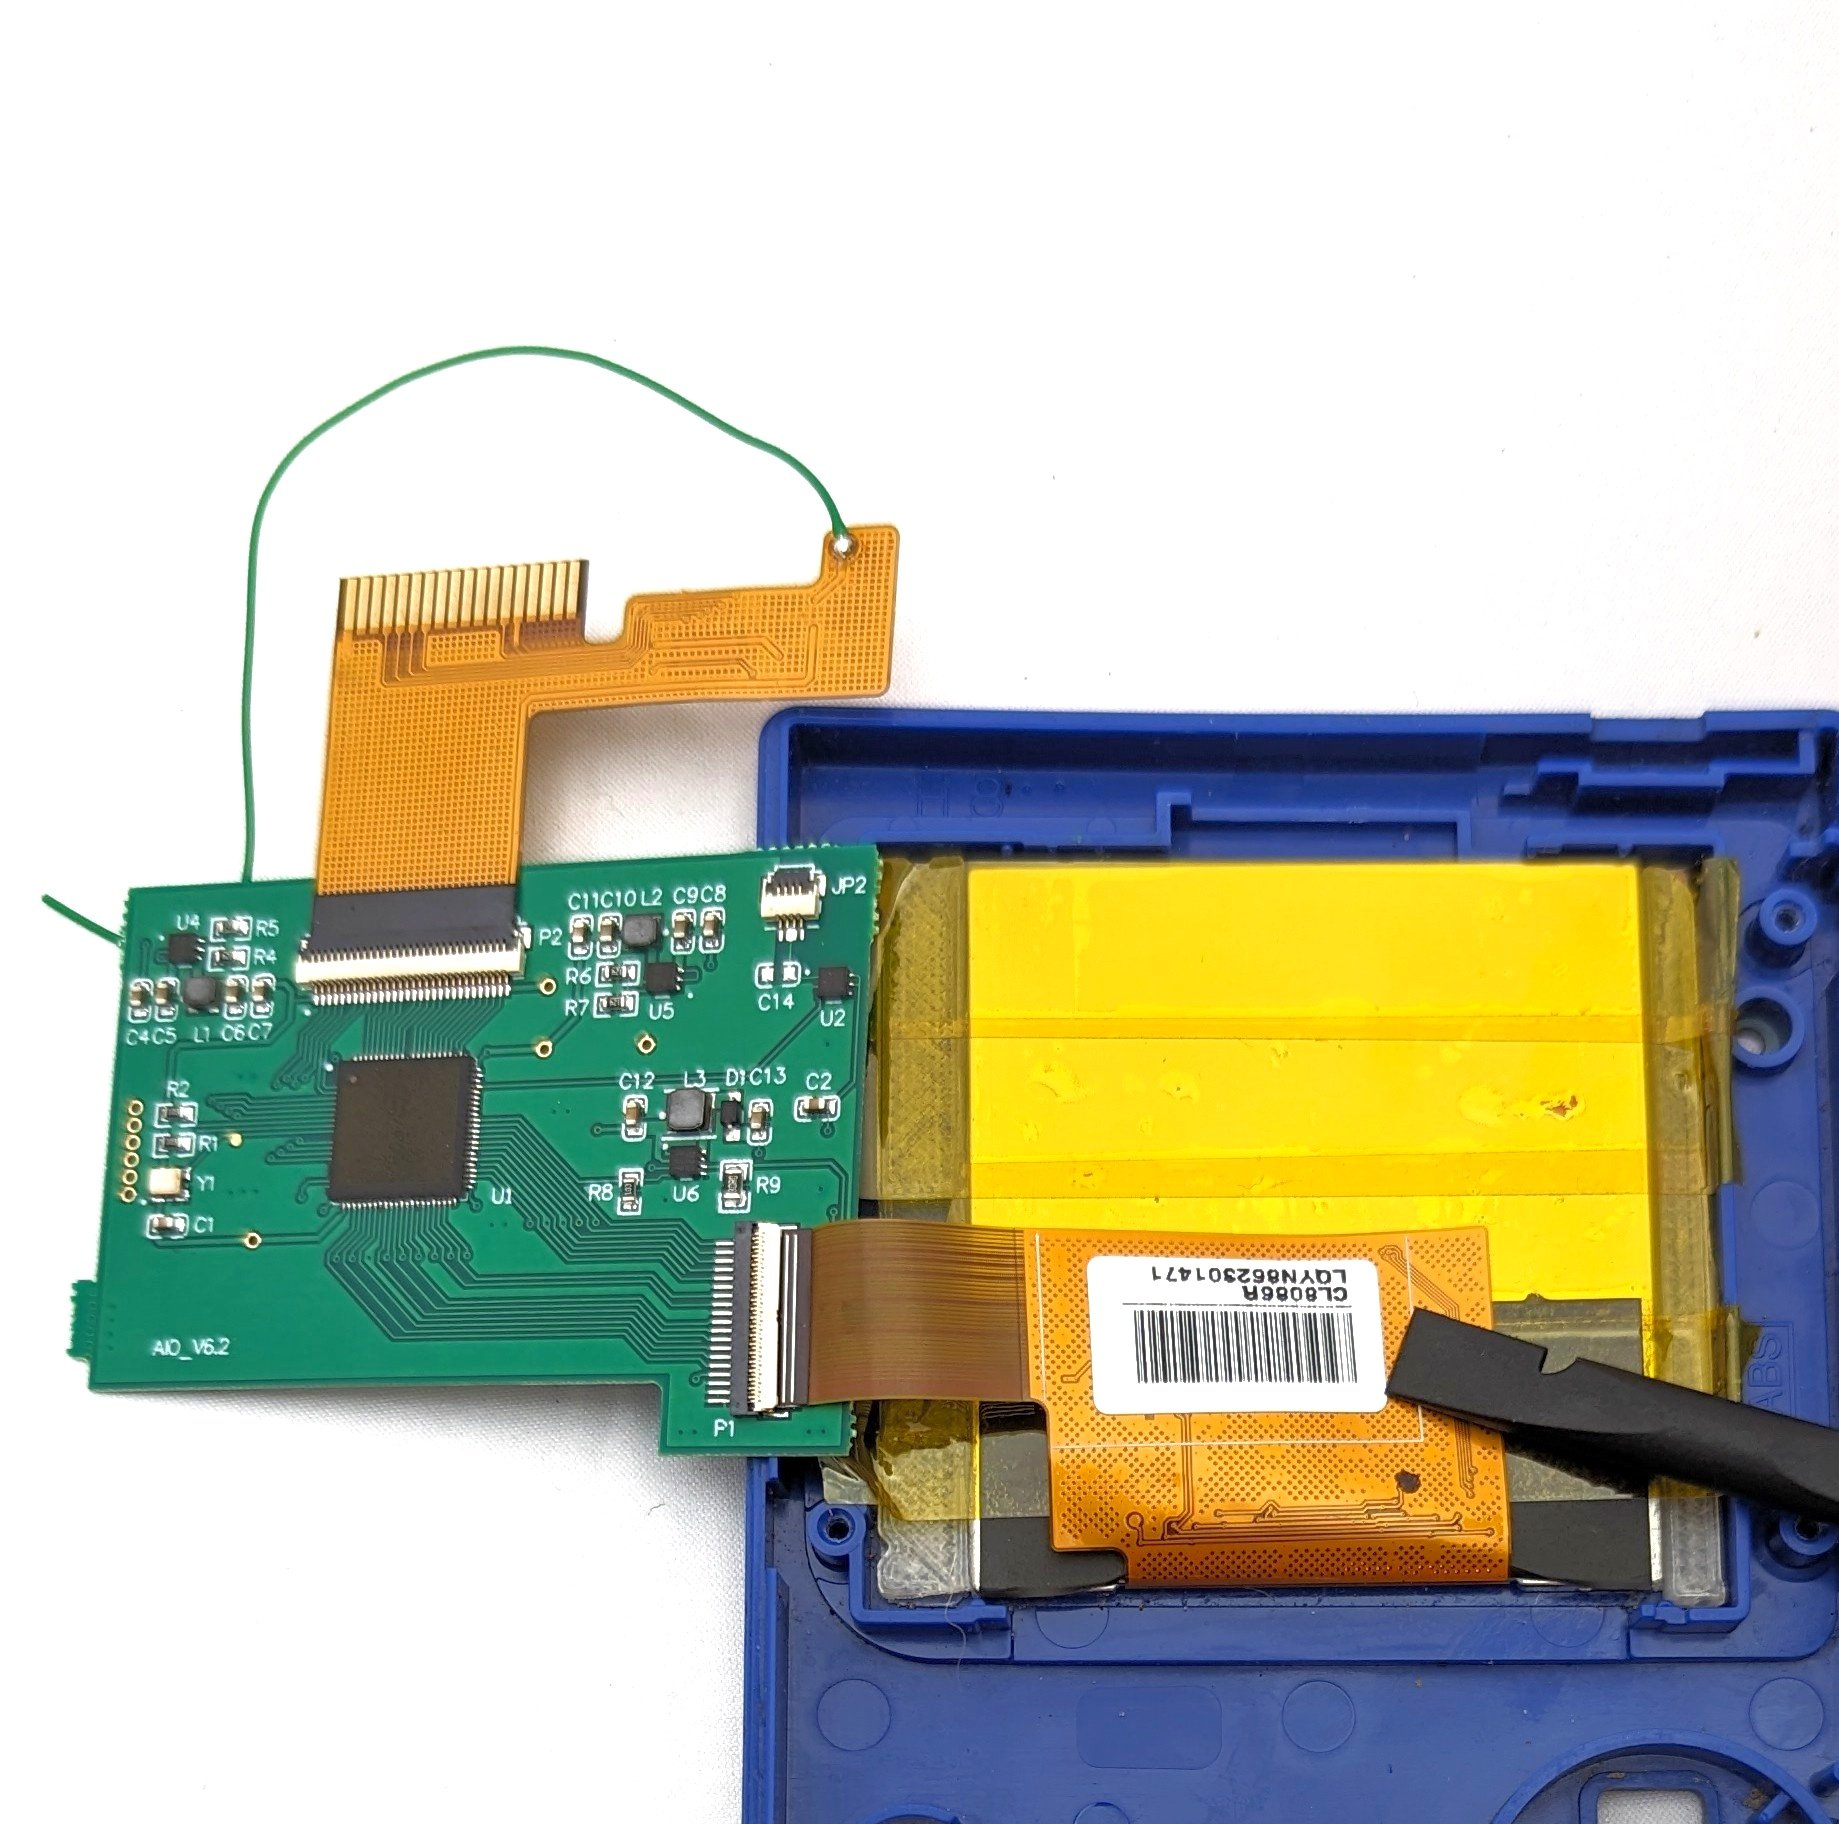 The inside shell of a game boy with a new screen implemented. A circuit board hangs off the side with a single wire leading off.